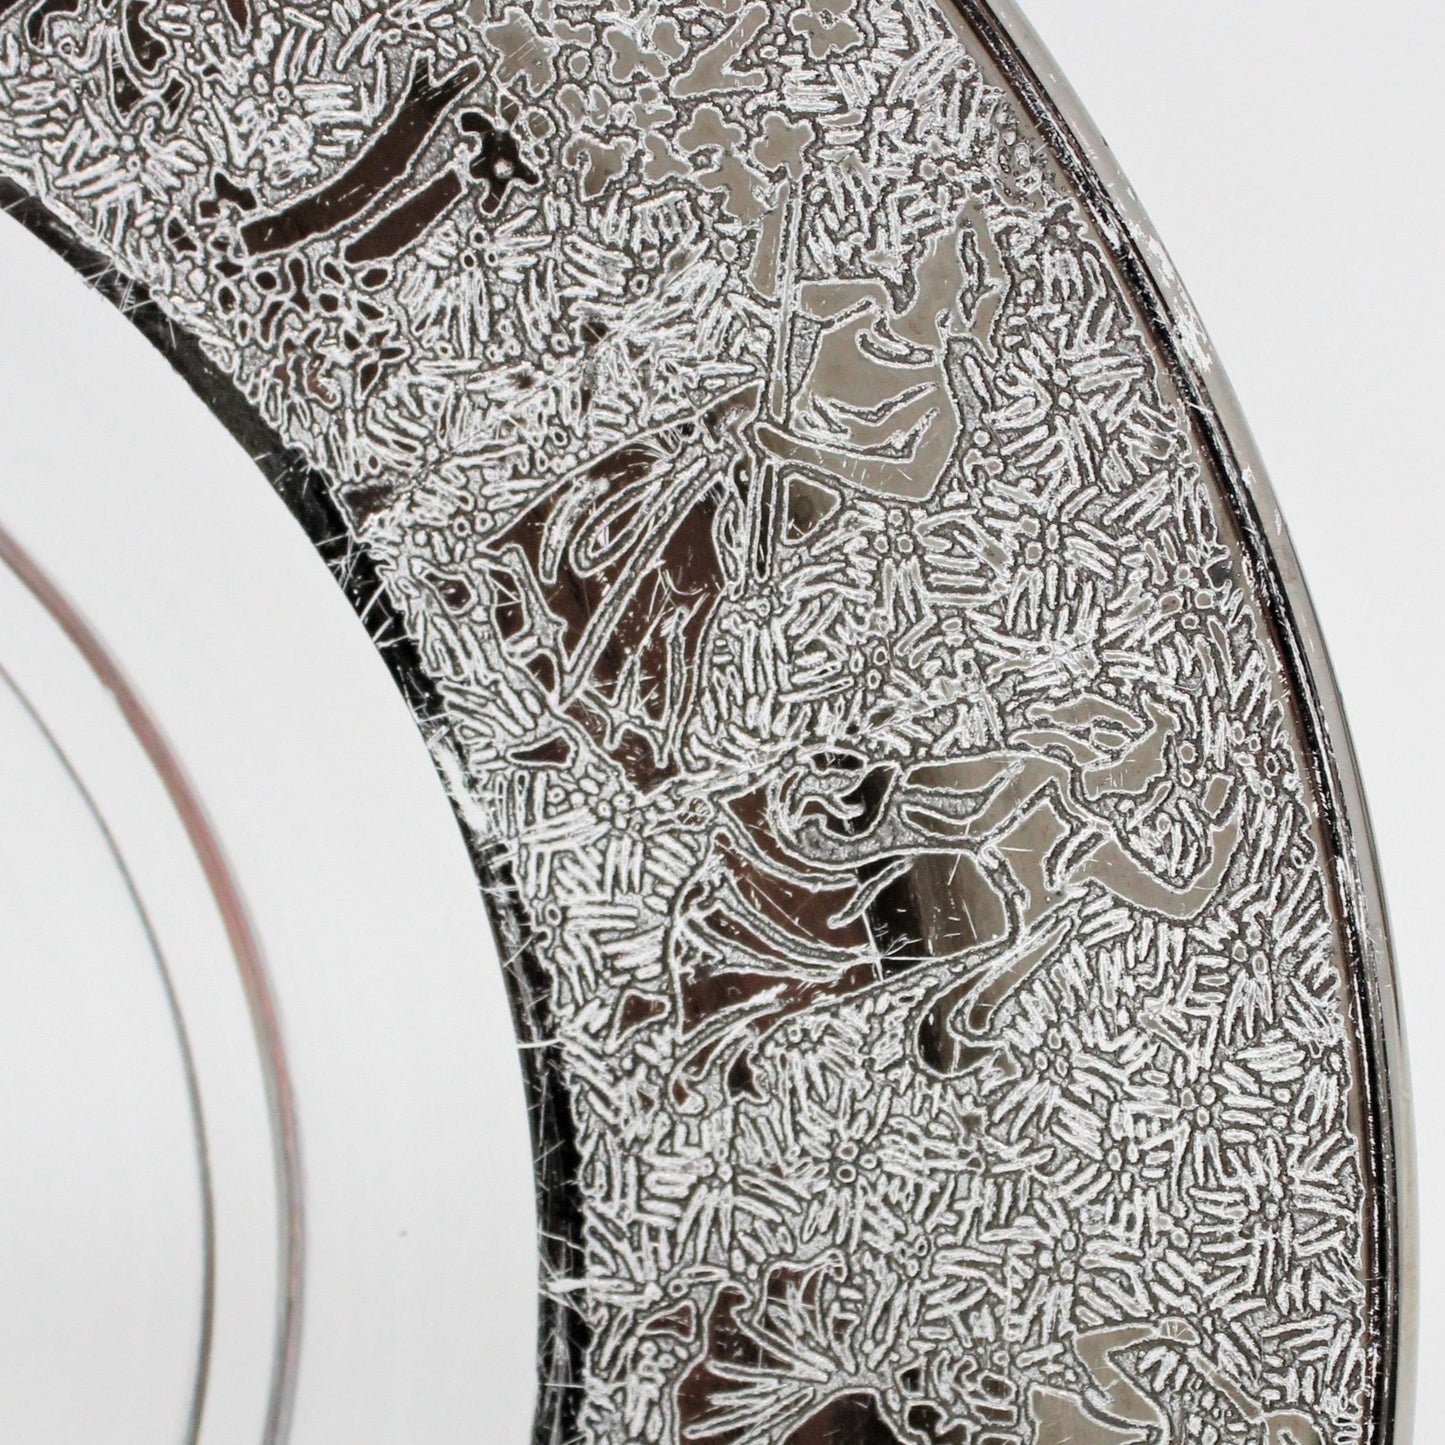 Bread & Butter Plates, Glass with Silver Overlay Greek/Roman Motif, Vintage, Set of 5, RARE, SOLD